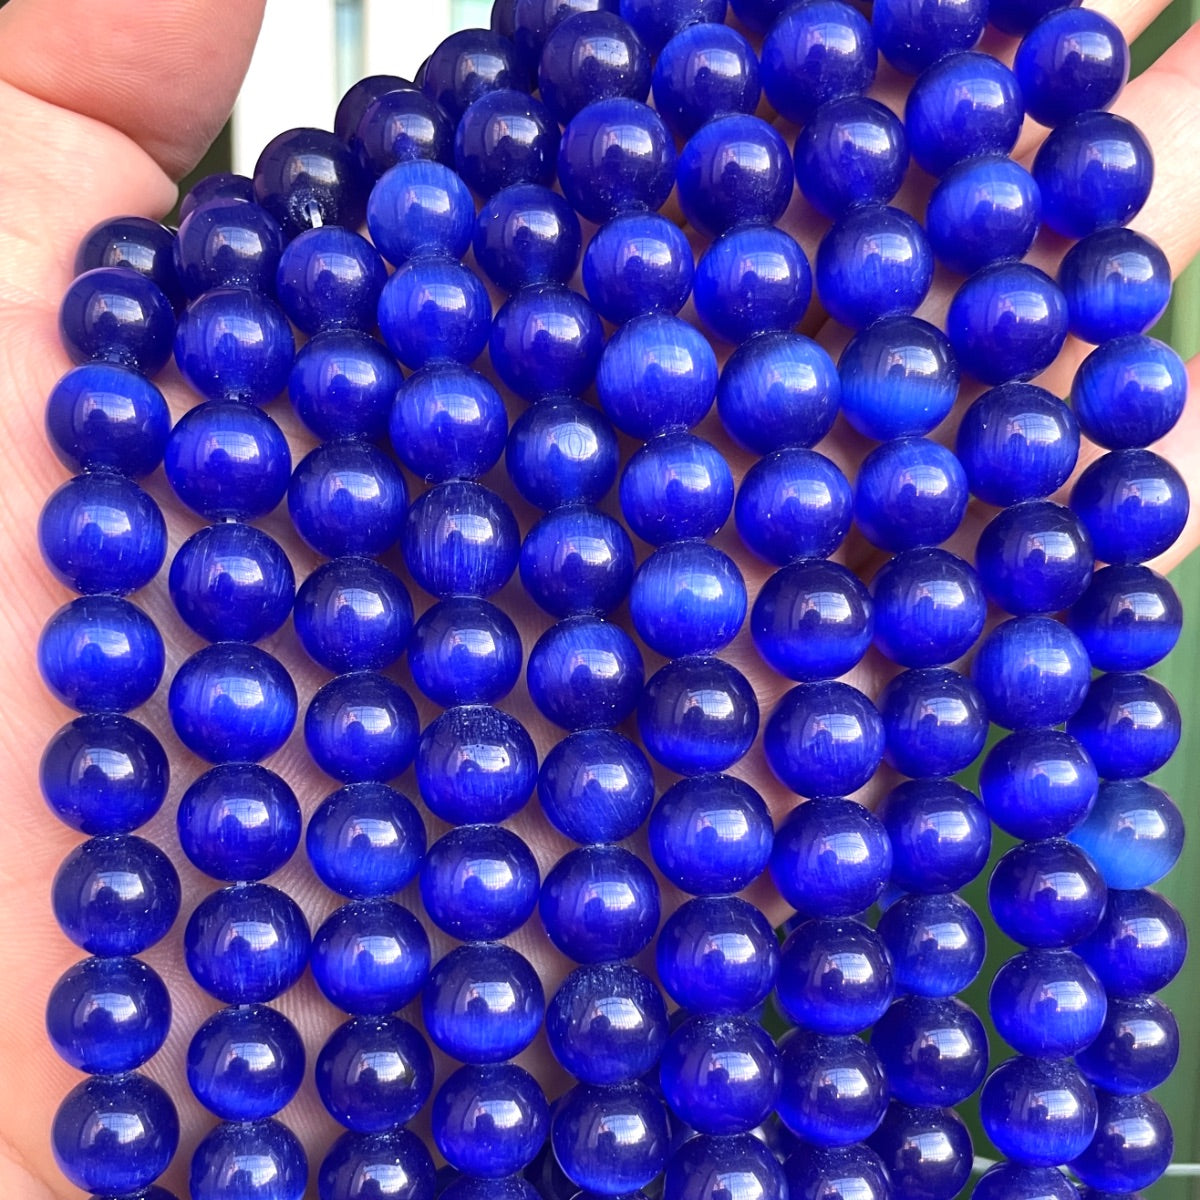 2 Strands/Lot 10mm Natural Navy Blue Cat's Eye Opal Stone Round Beads Stone Beads Cat's Eye Beads New Beads Arrivals Charms Beads Beyond